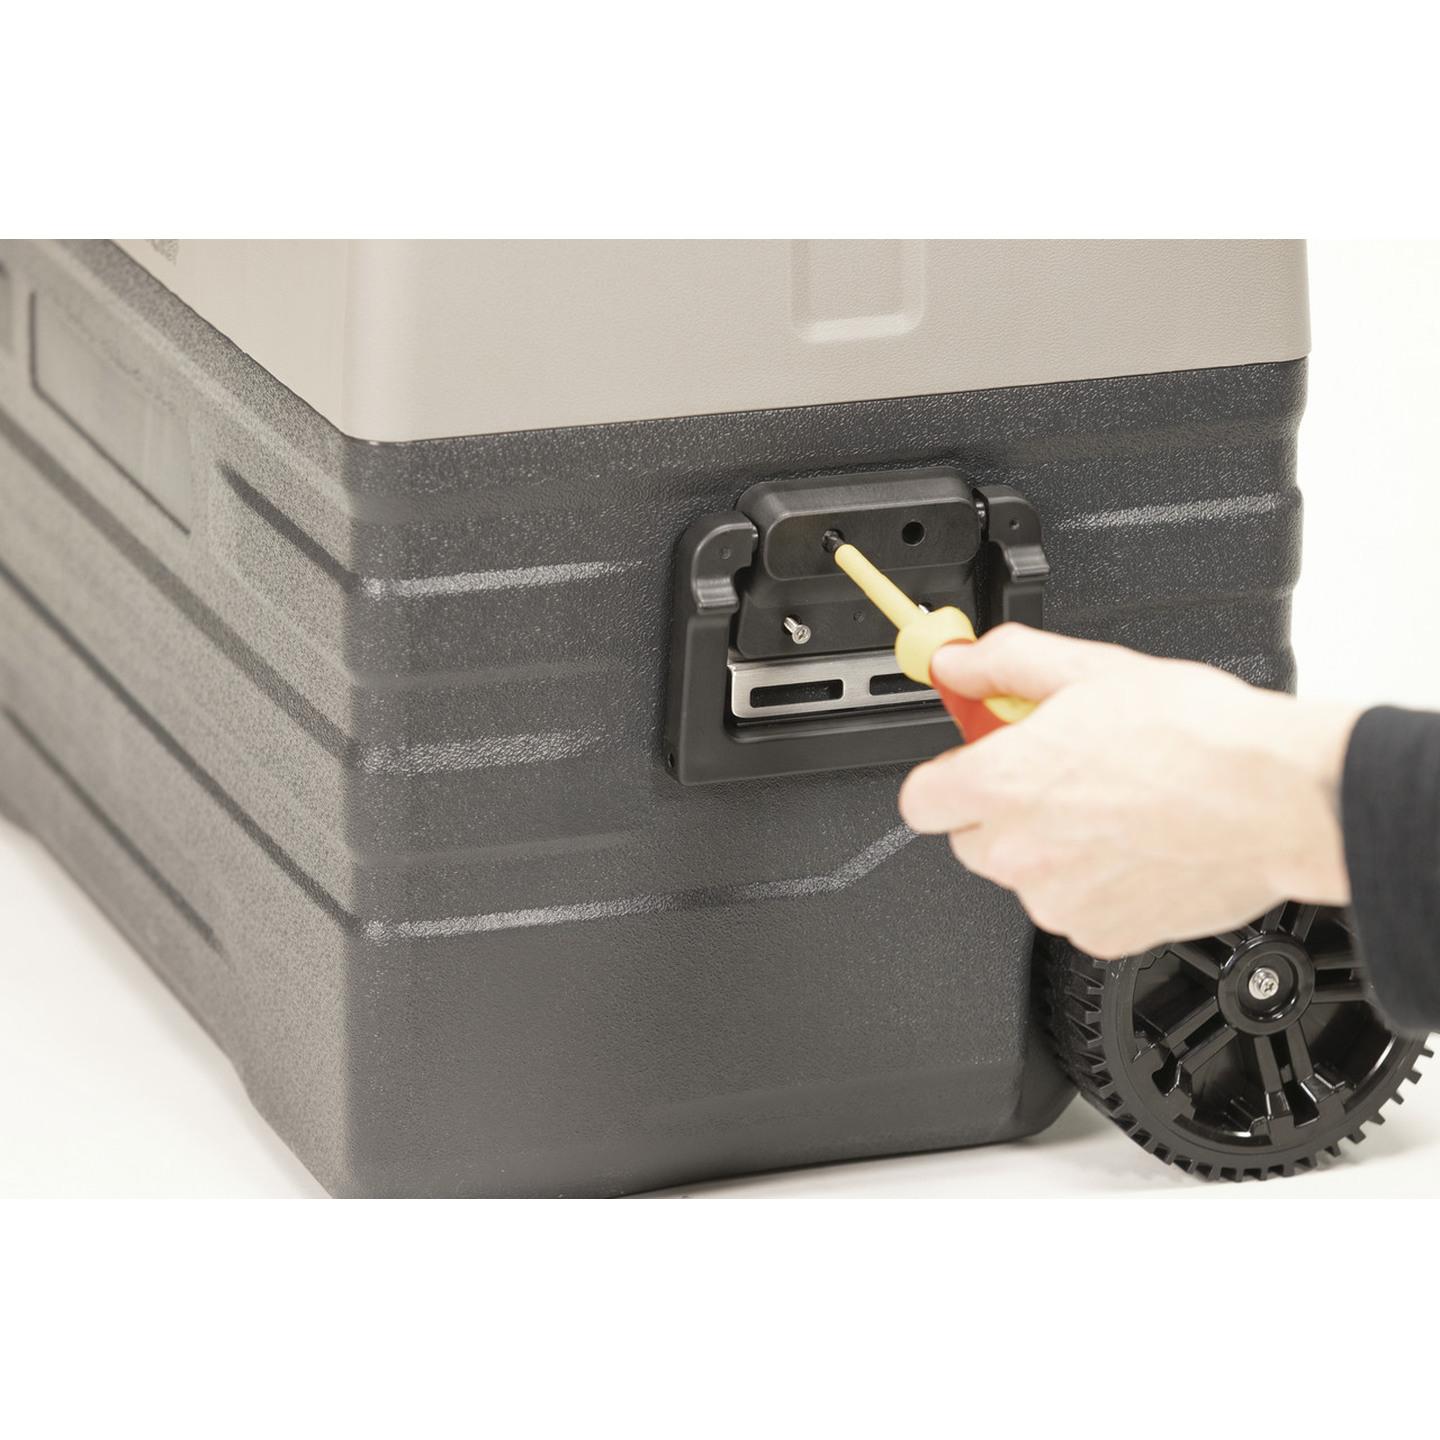 42L Brass Monkey Ultra-Portable Fridge/Freezer with Wheels and Battery Compartment